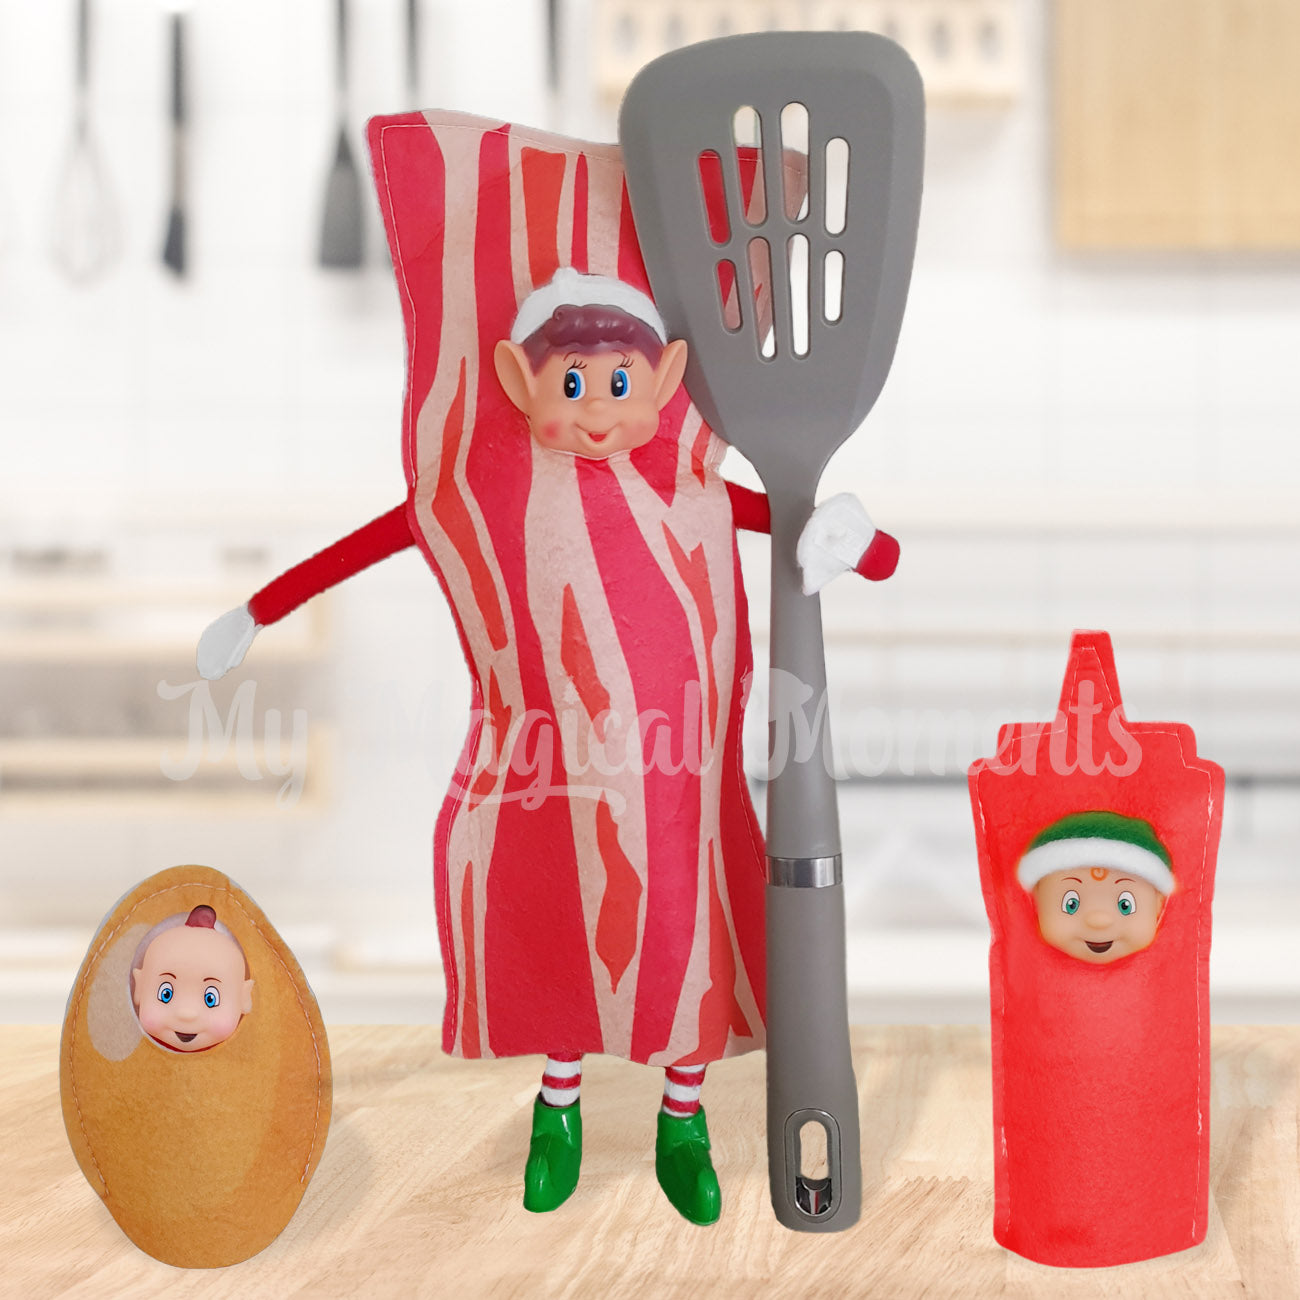 Bacon elf with ketchup elf toddler and baby elf dressed as an egg